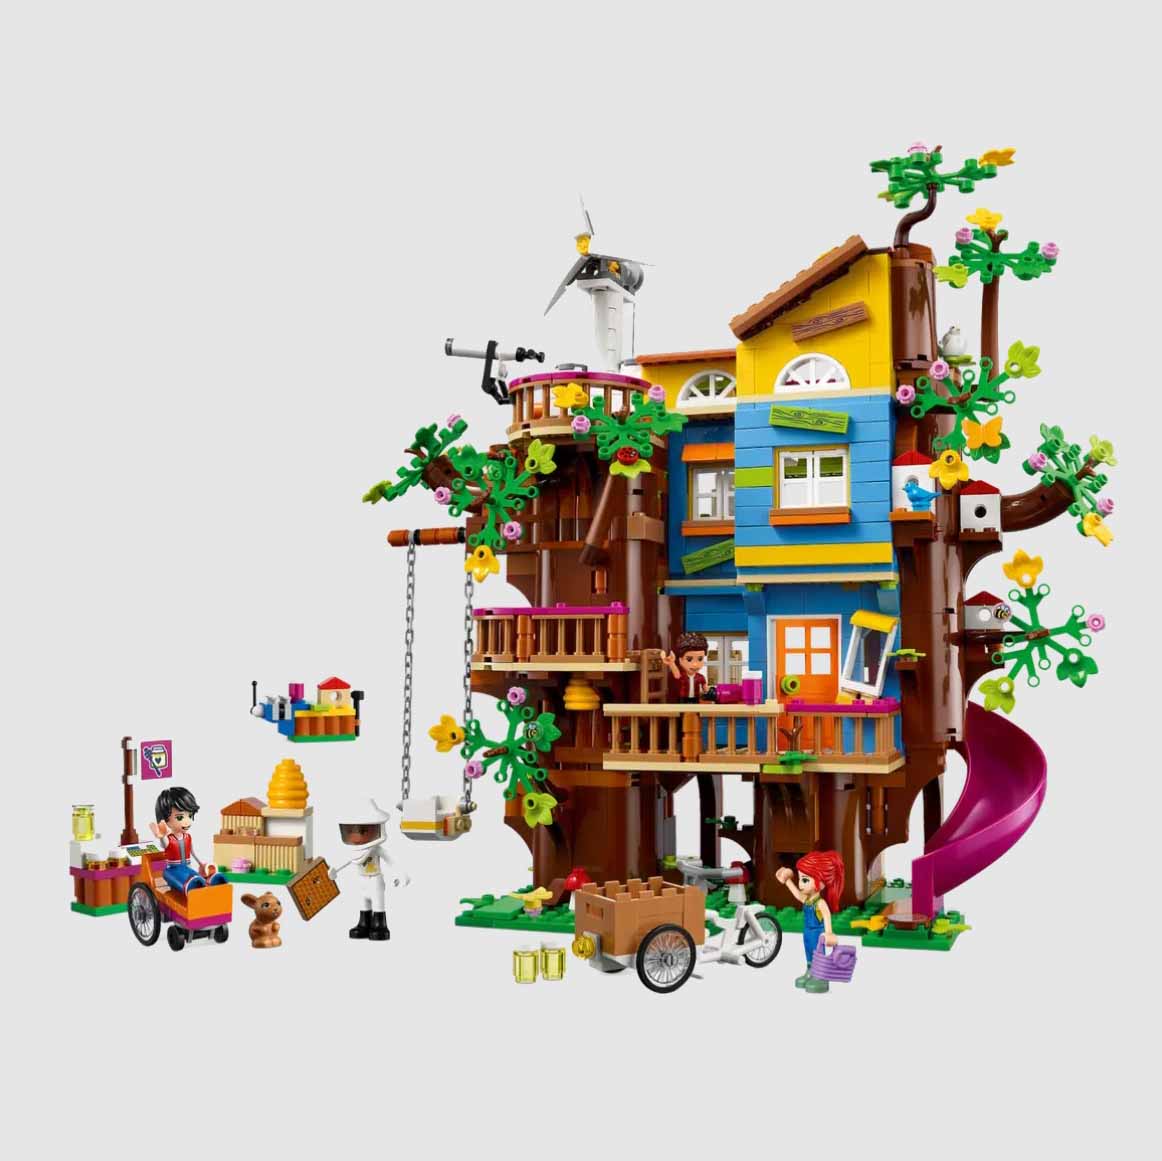 LEGO treehouse with characters